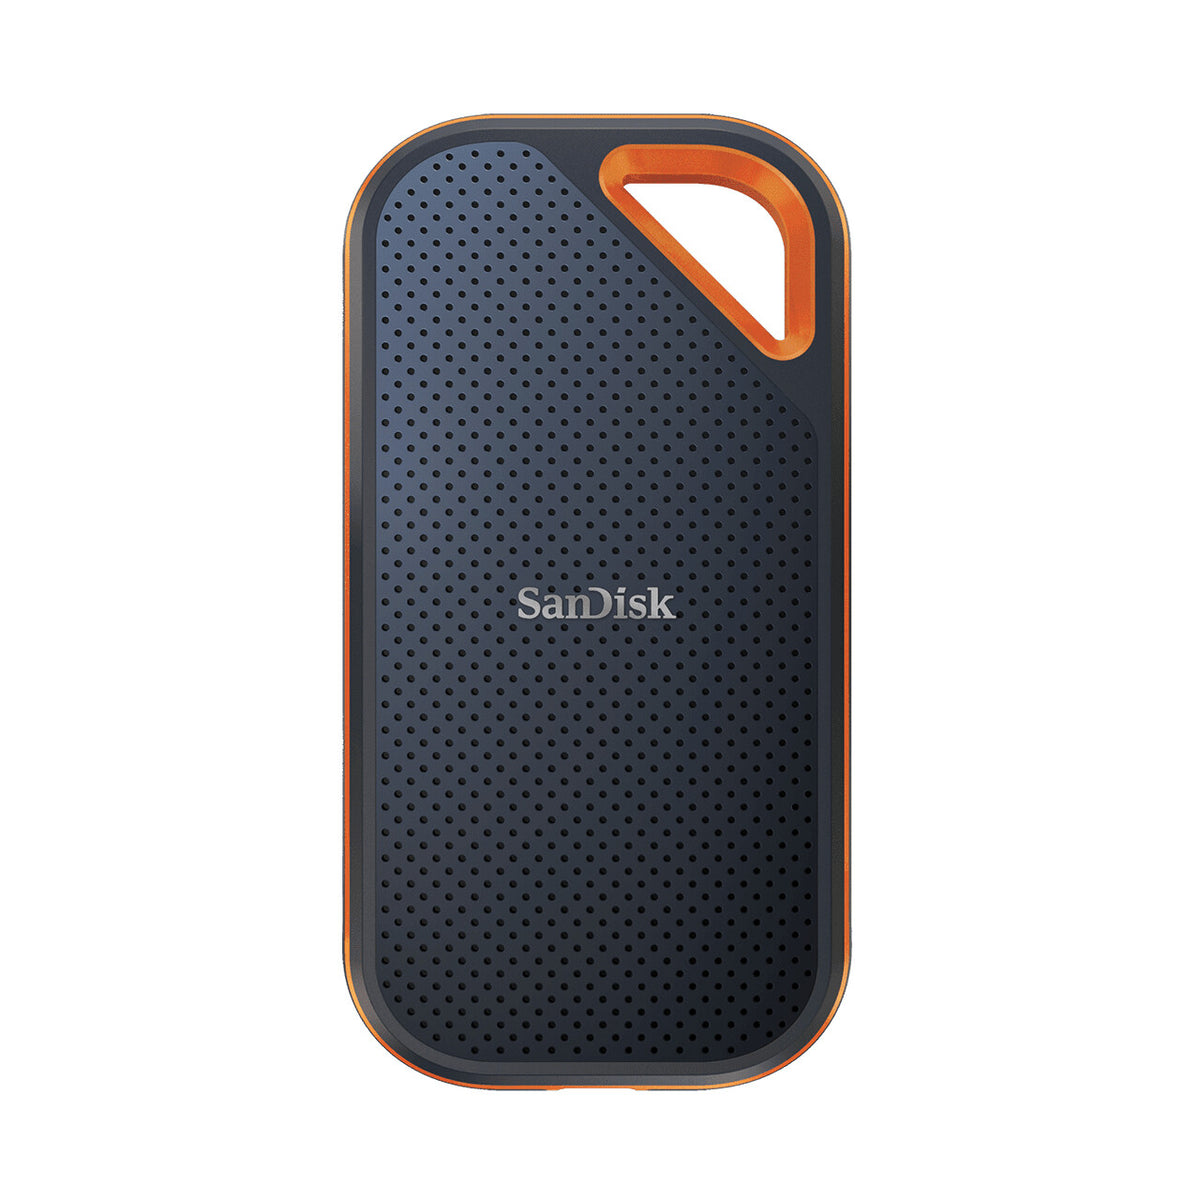 SanDisk Extreme PRO External solid state drive - 4 TB